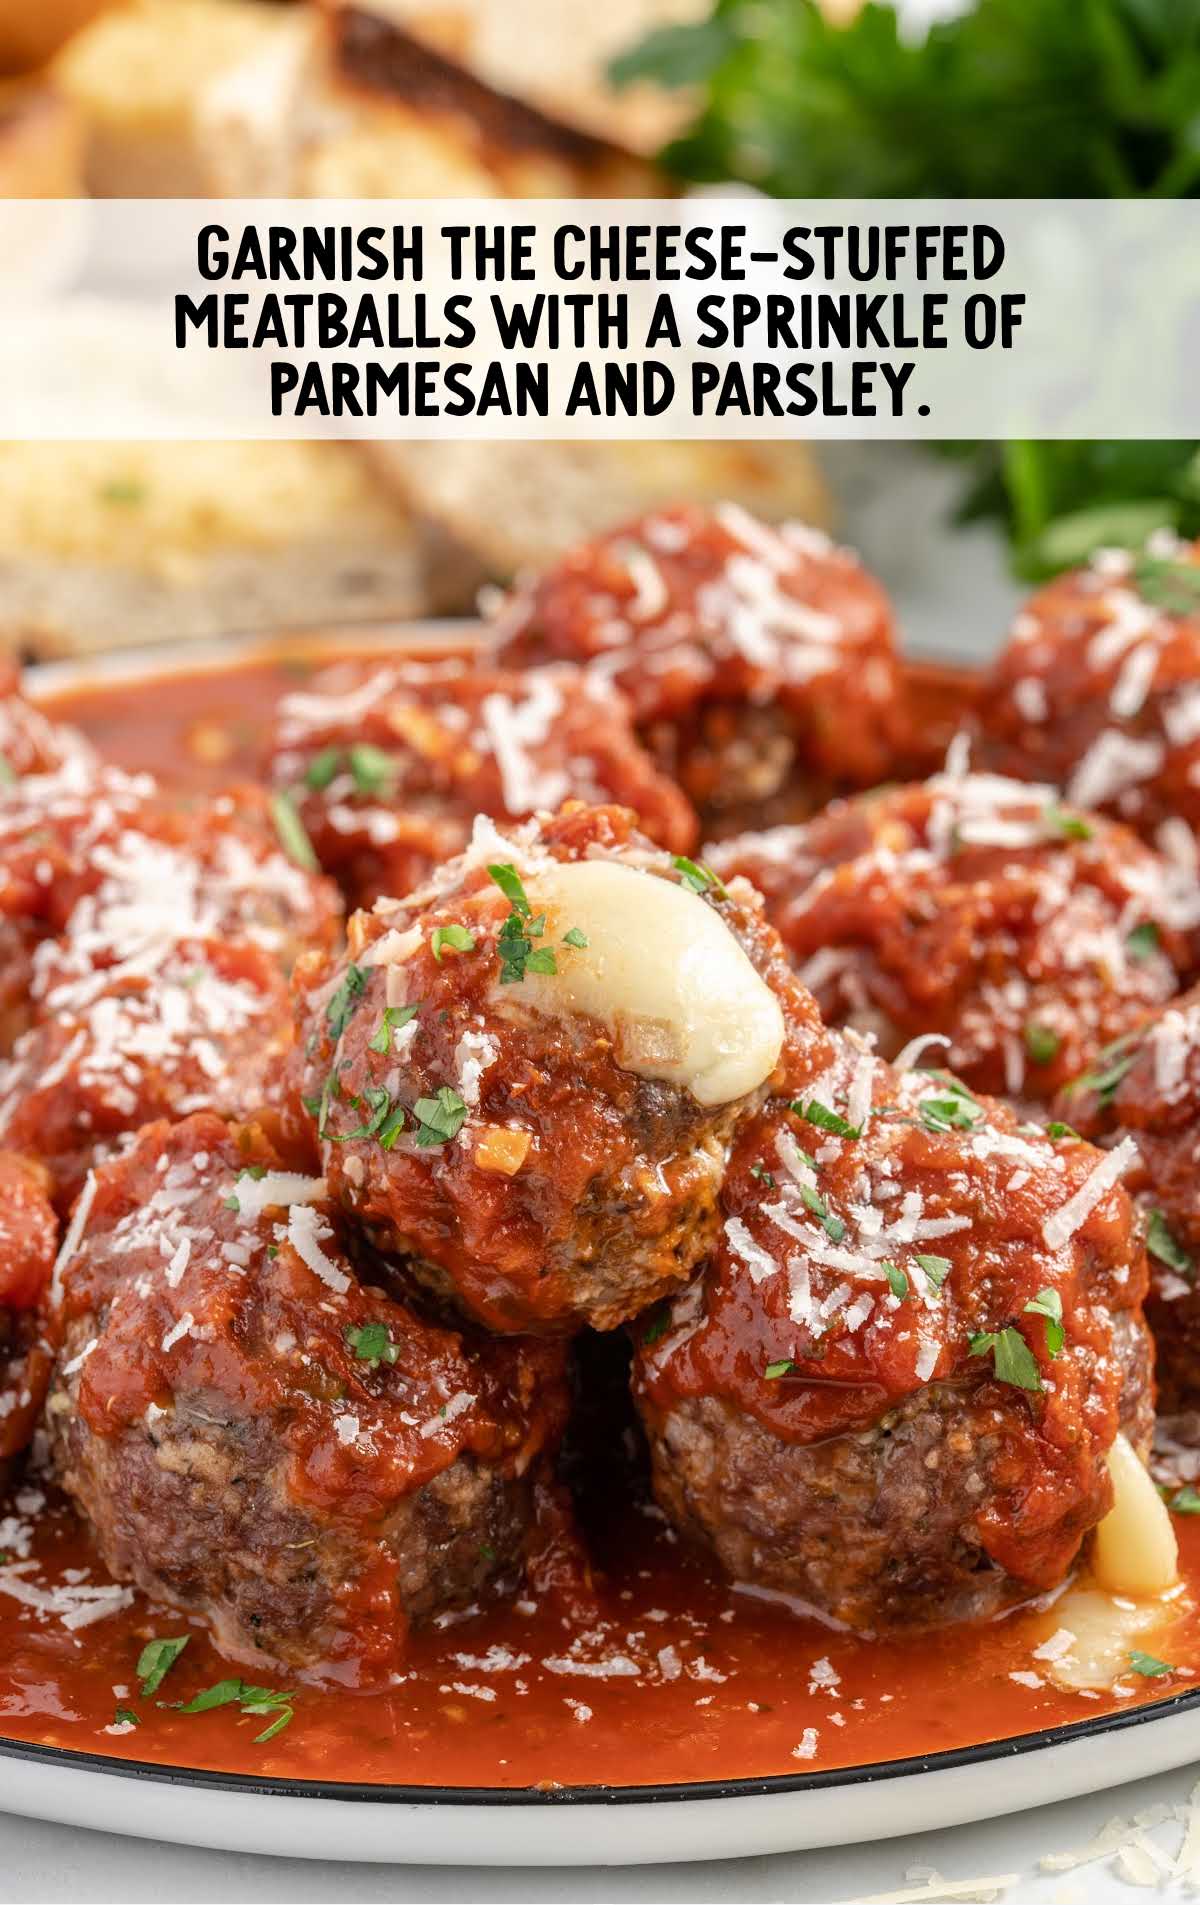 cheese stuffed meatballs garnished with parmesan and parsley